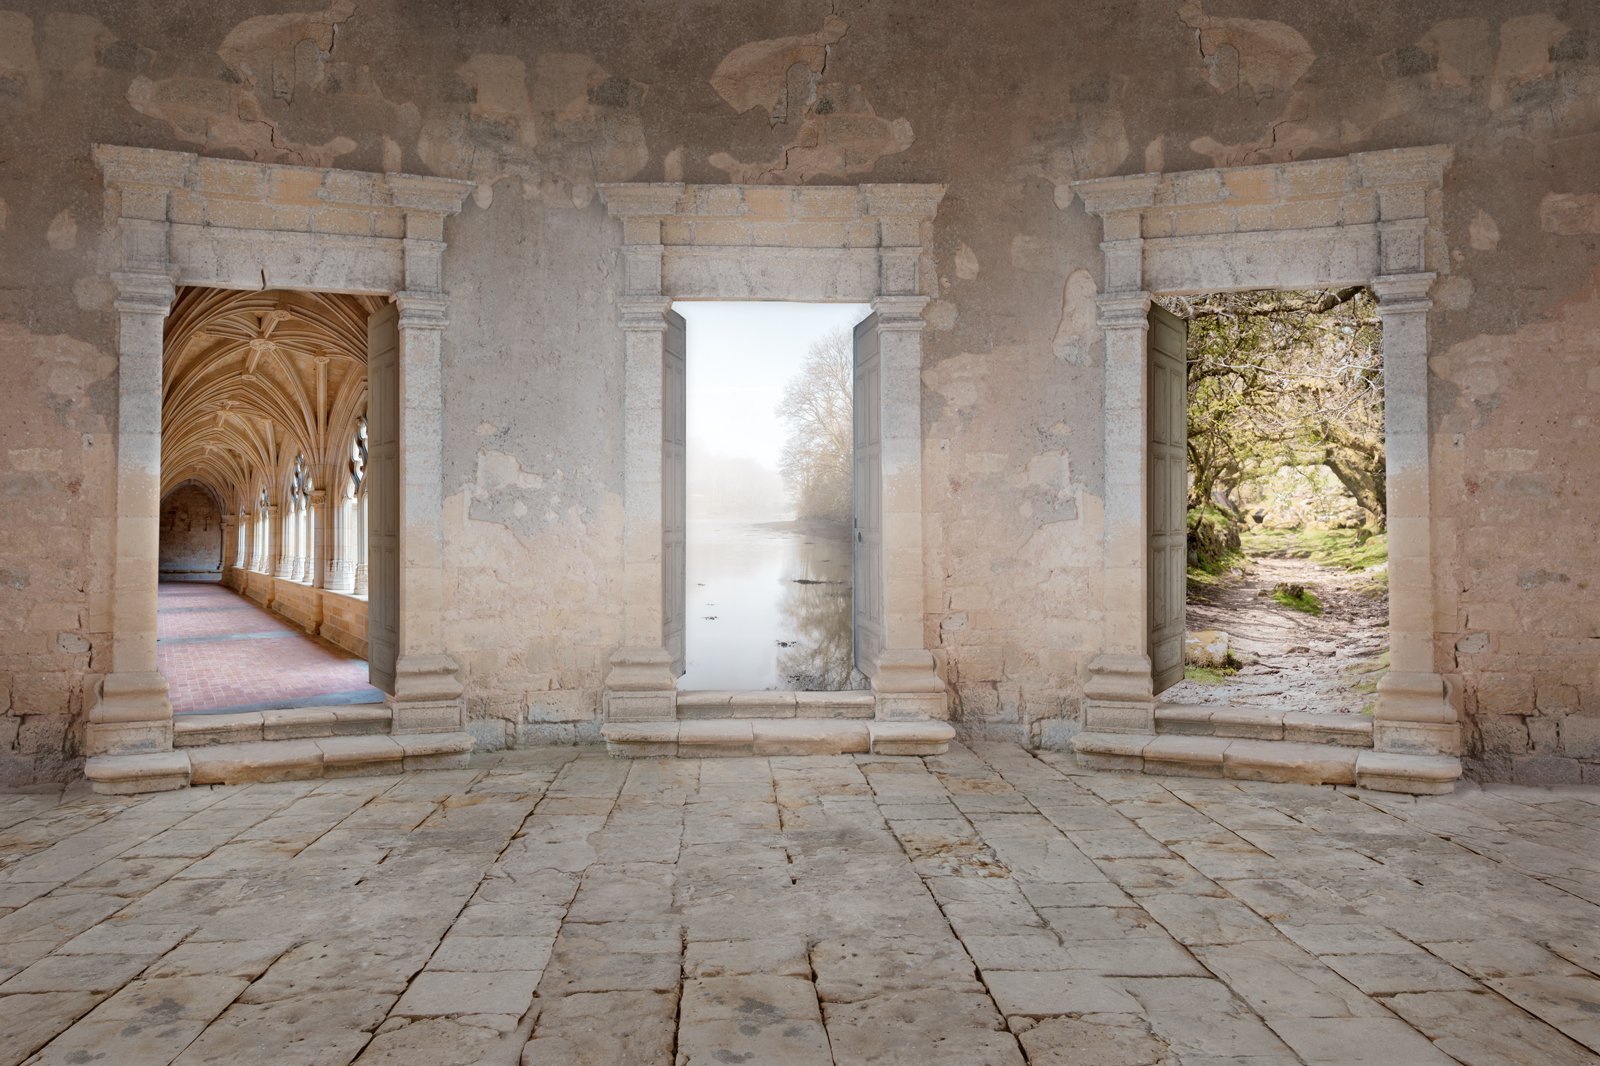 photo art showing three doors leading to tranquil spaces